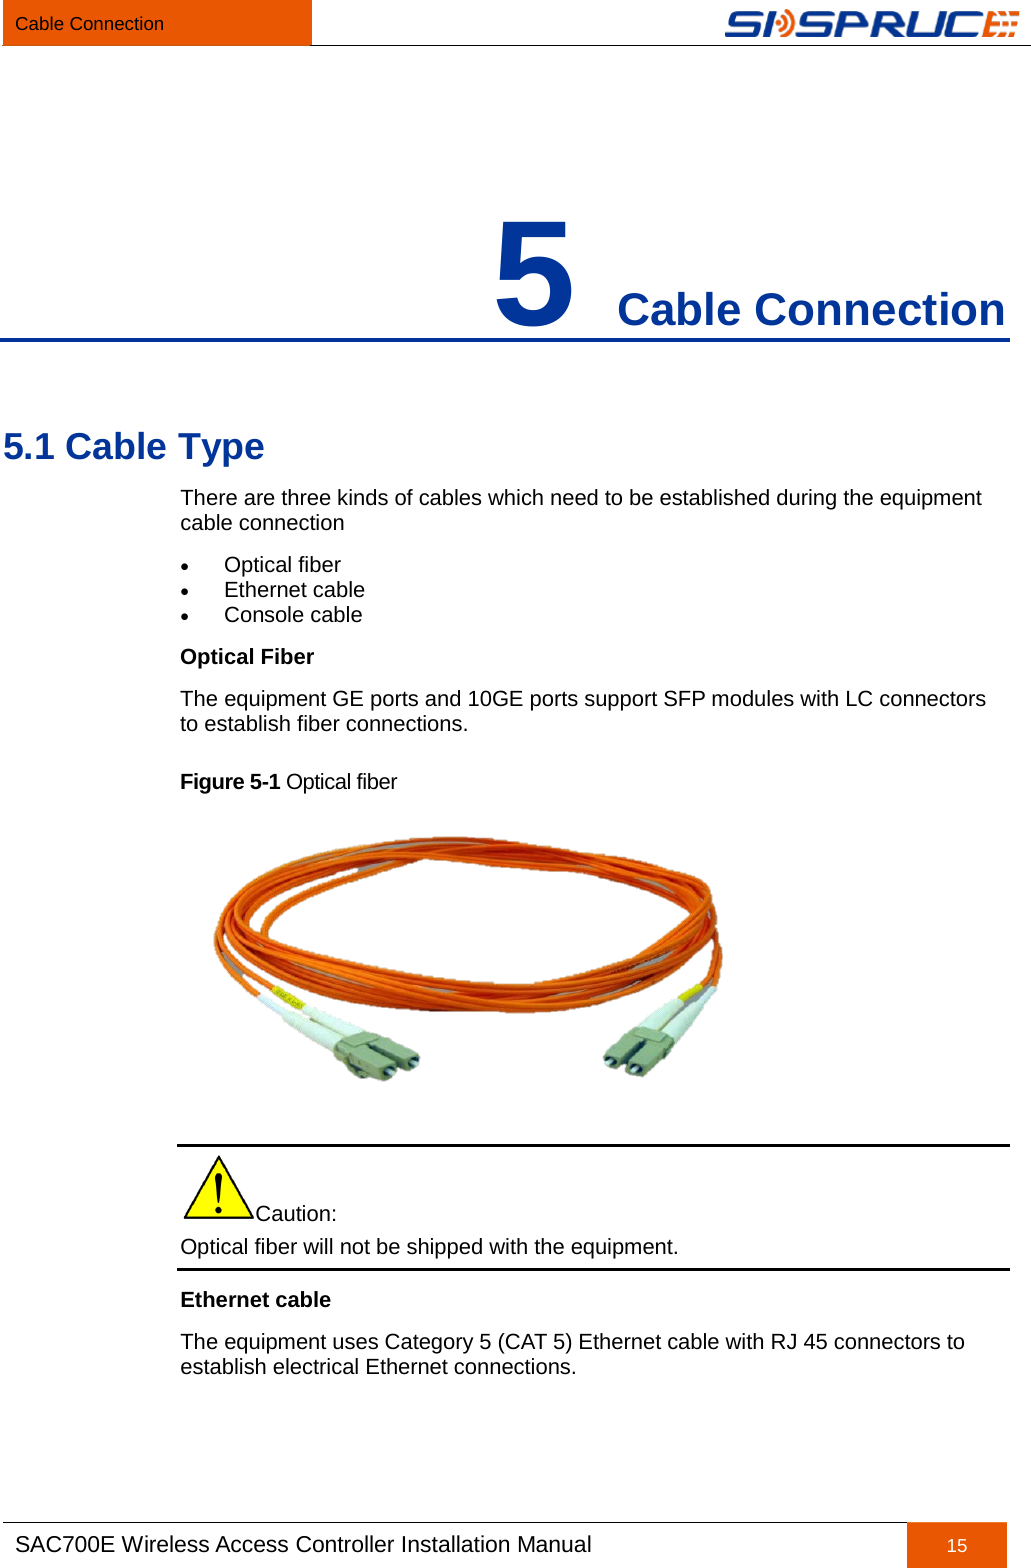 Cable Connection   SAC700E Wireless Access Controller Installation Manual 15  5 Cable Connection 5.1 Cable Type There are three kinds of cables which need to be established during the equipment cable connection • Optical fiber • Ethernet cable • Console cable Optical Fiber   The equipment GE ports and 10GE ports support SFP modules with LC connectors to establish fiber connections. Figure 5-1 Optical fiber  Caution: Optical fiber will not be shipped with the equipment.   Ethernet cable The equipment uses Category 5 (CAT 5) Ethernet cable with RJ 45 connectors to establish electrical Ethernet connections. 